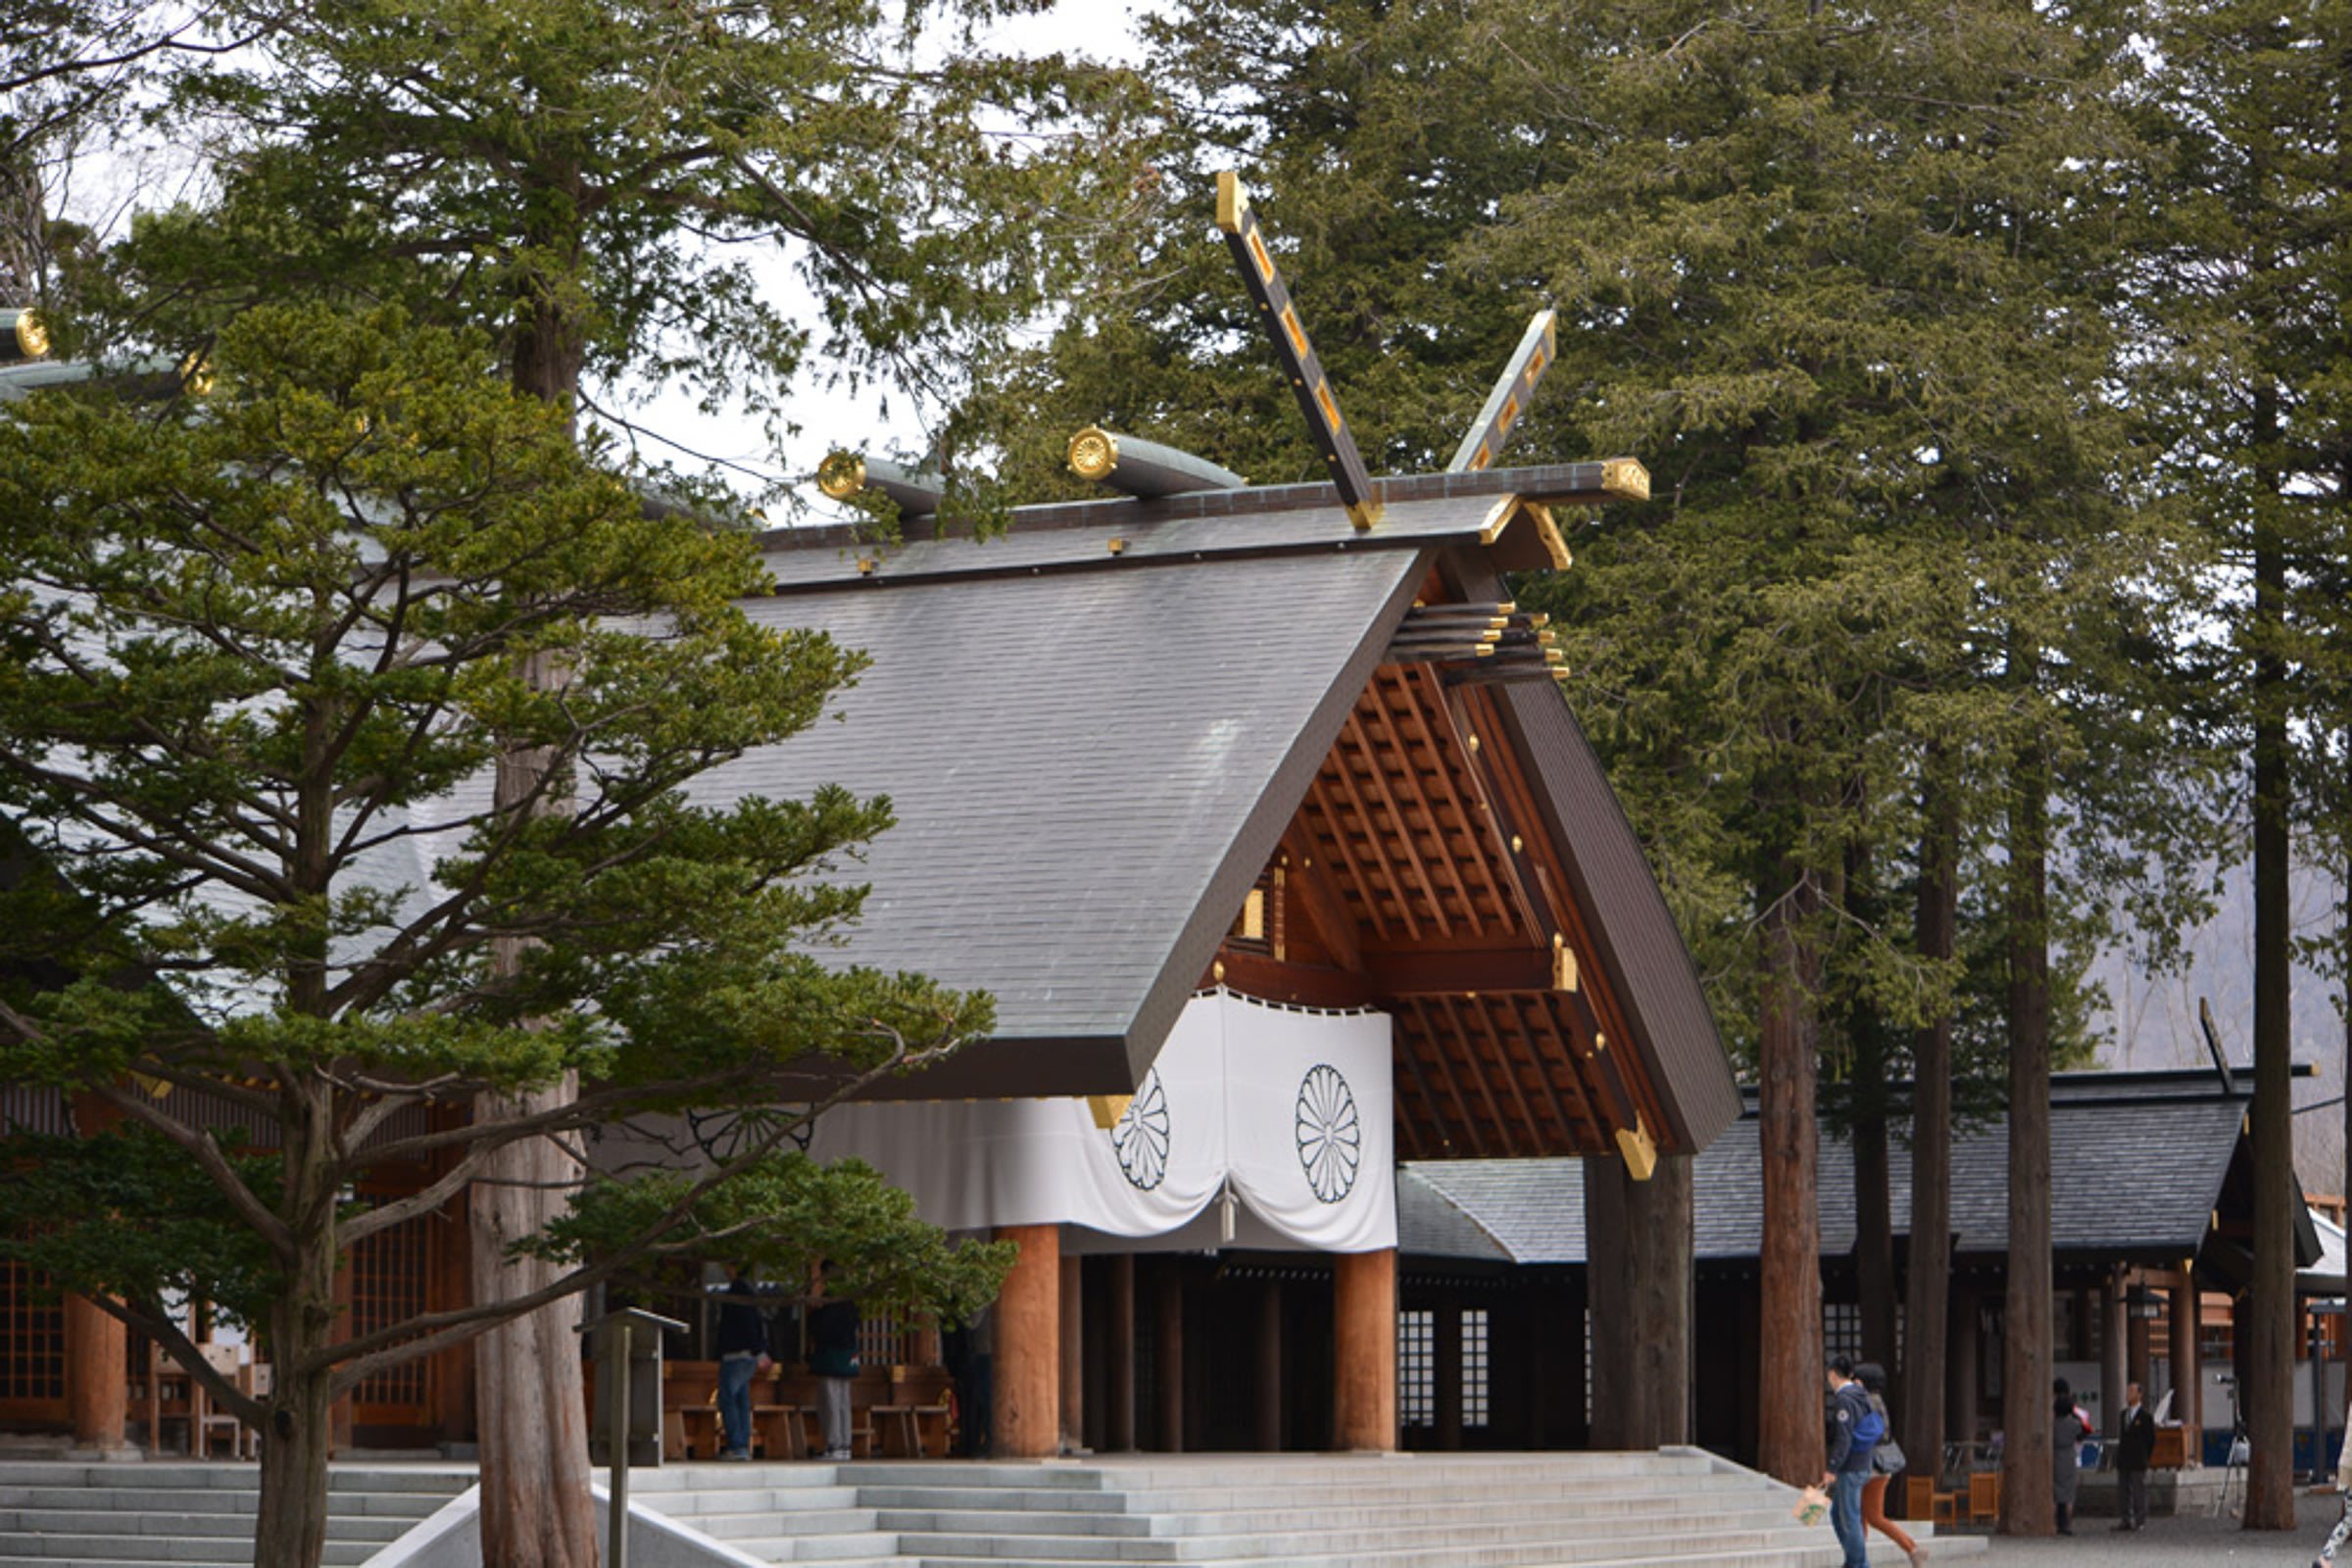 Hokkaido Shrine, the largest and most important shrine in Hokkaido. Around the shrine are tall fir trees.